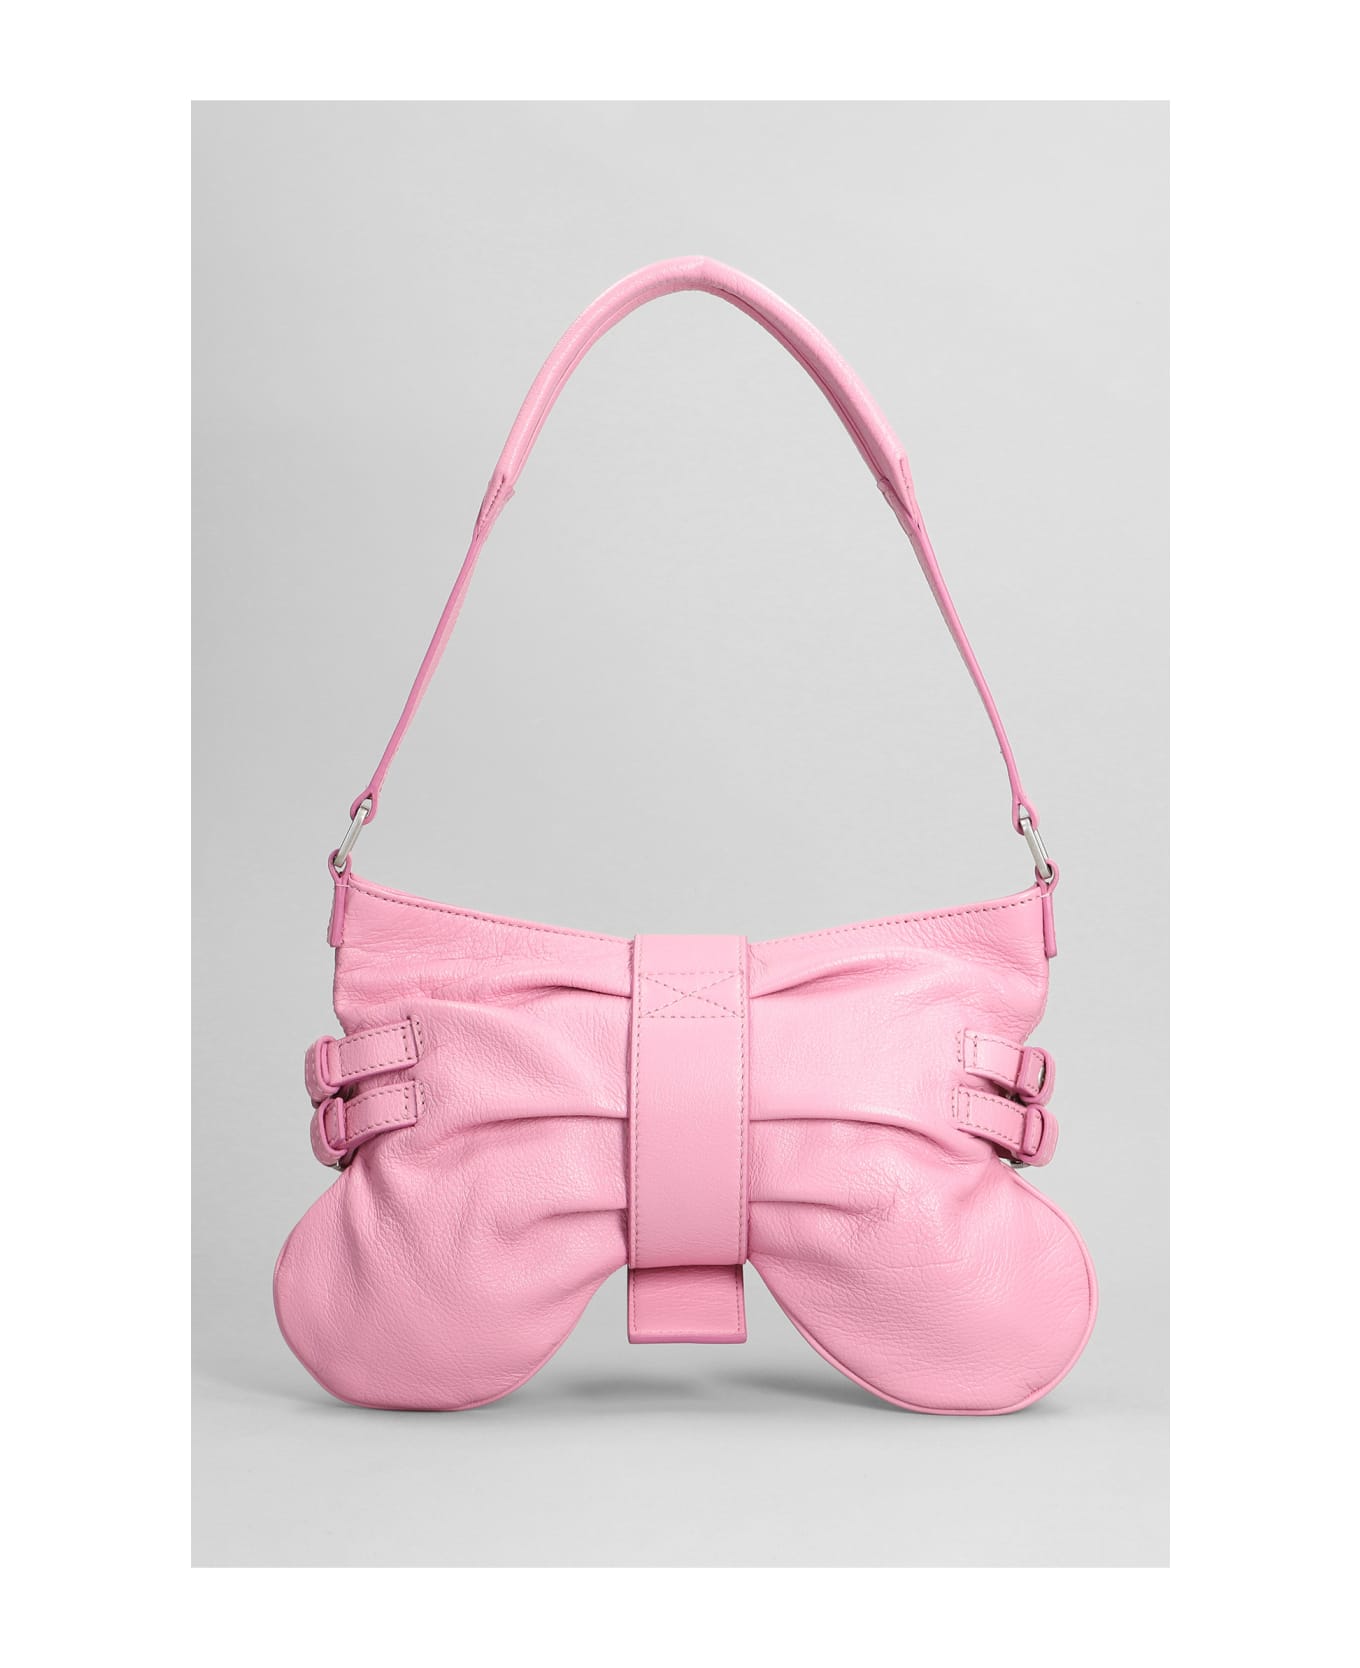 Blumarine Hand Bag In Rose-pink Leather - Pink